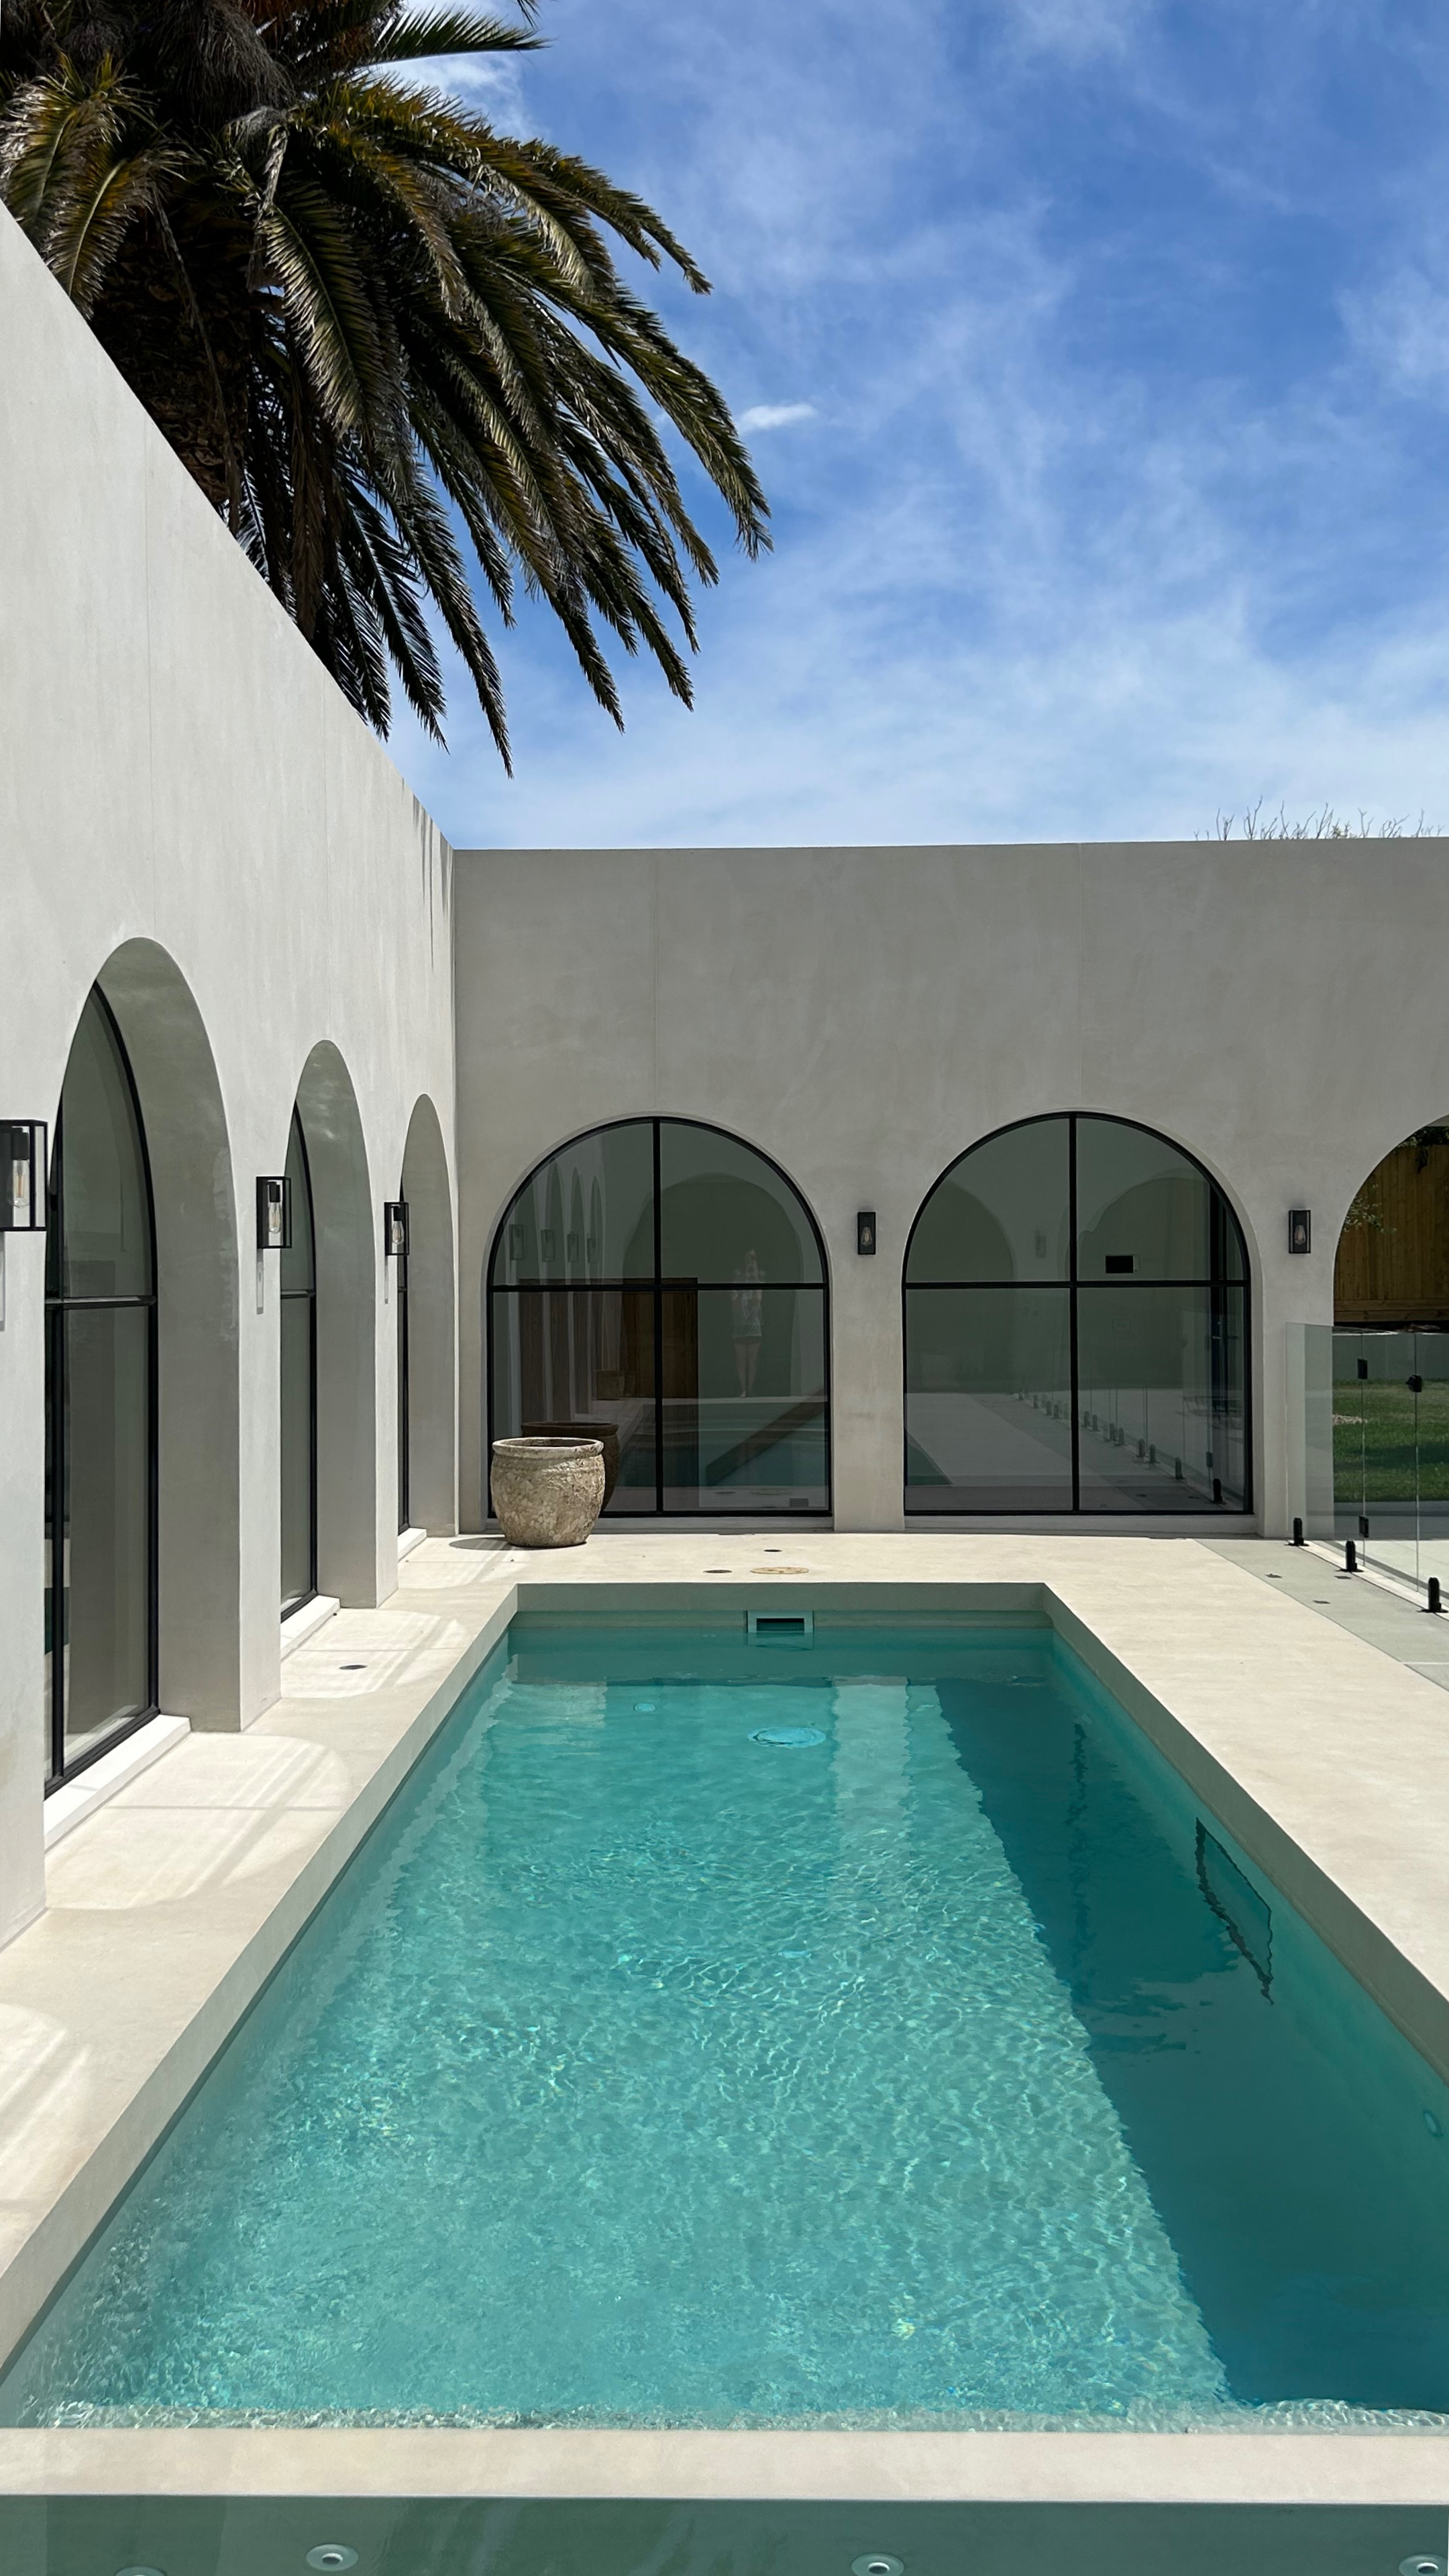 X-Bond Microcement Installed to pool and curved walls